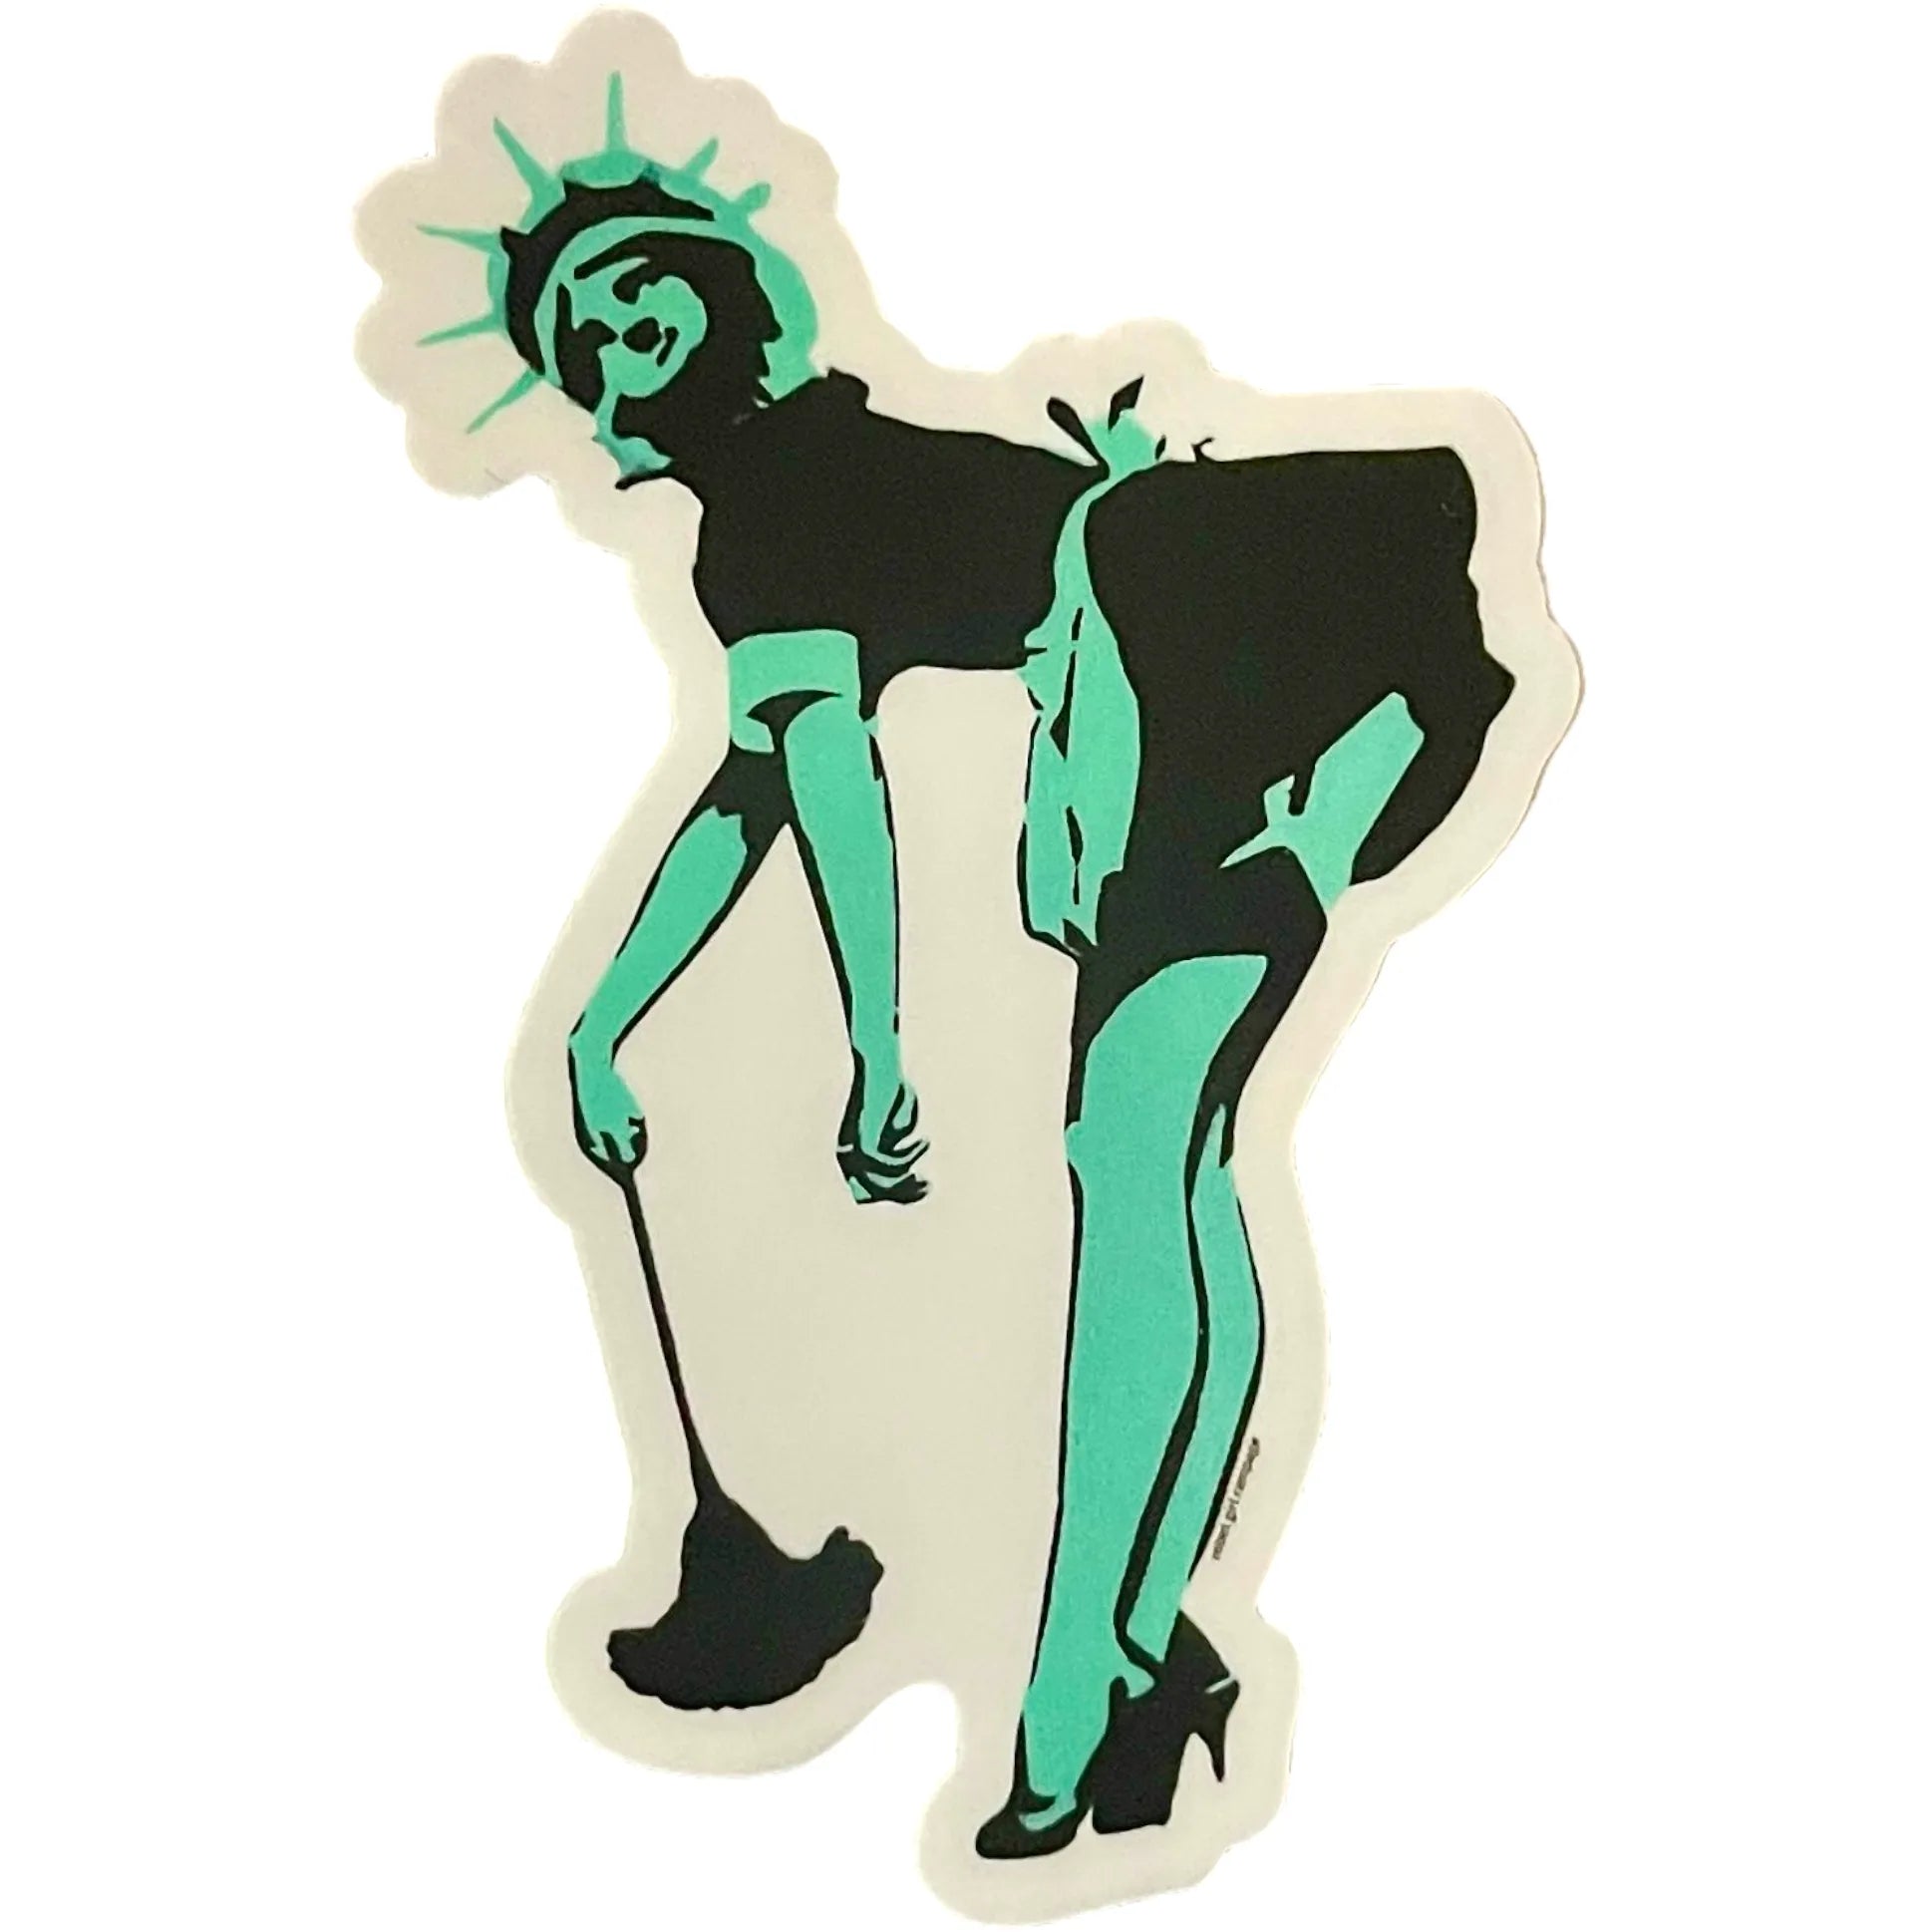 Lady Liberty Vinyl Sticker Statue of Liberty Stencil Art  in A French Maid Outfit Rebel Girl Rampage